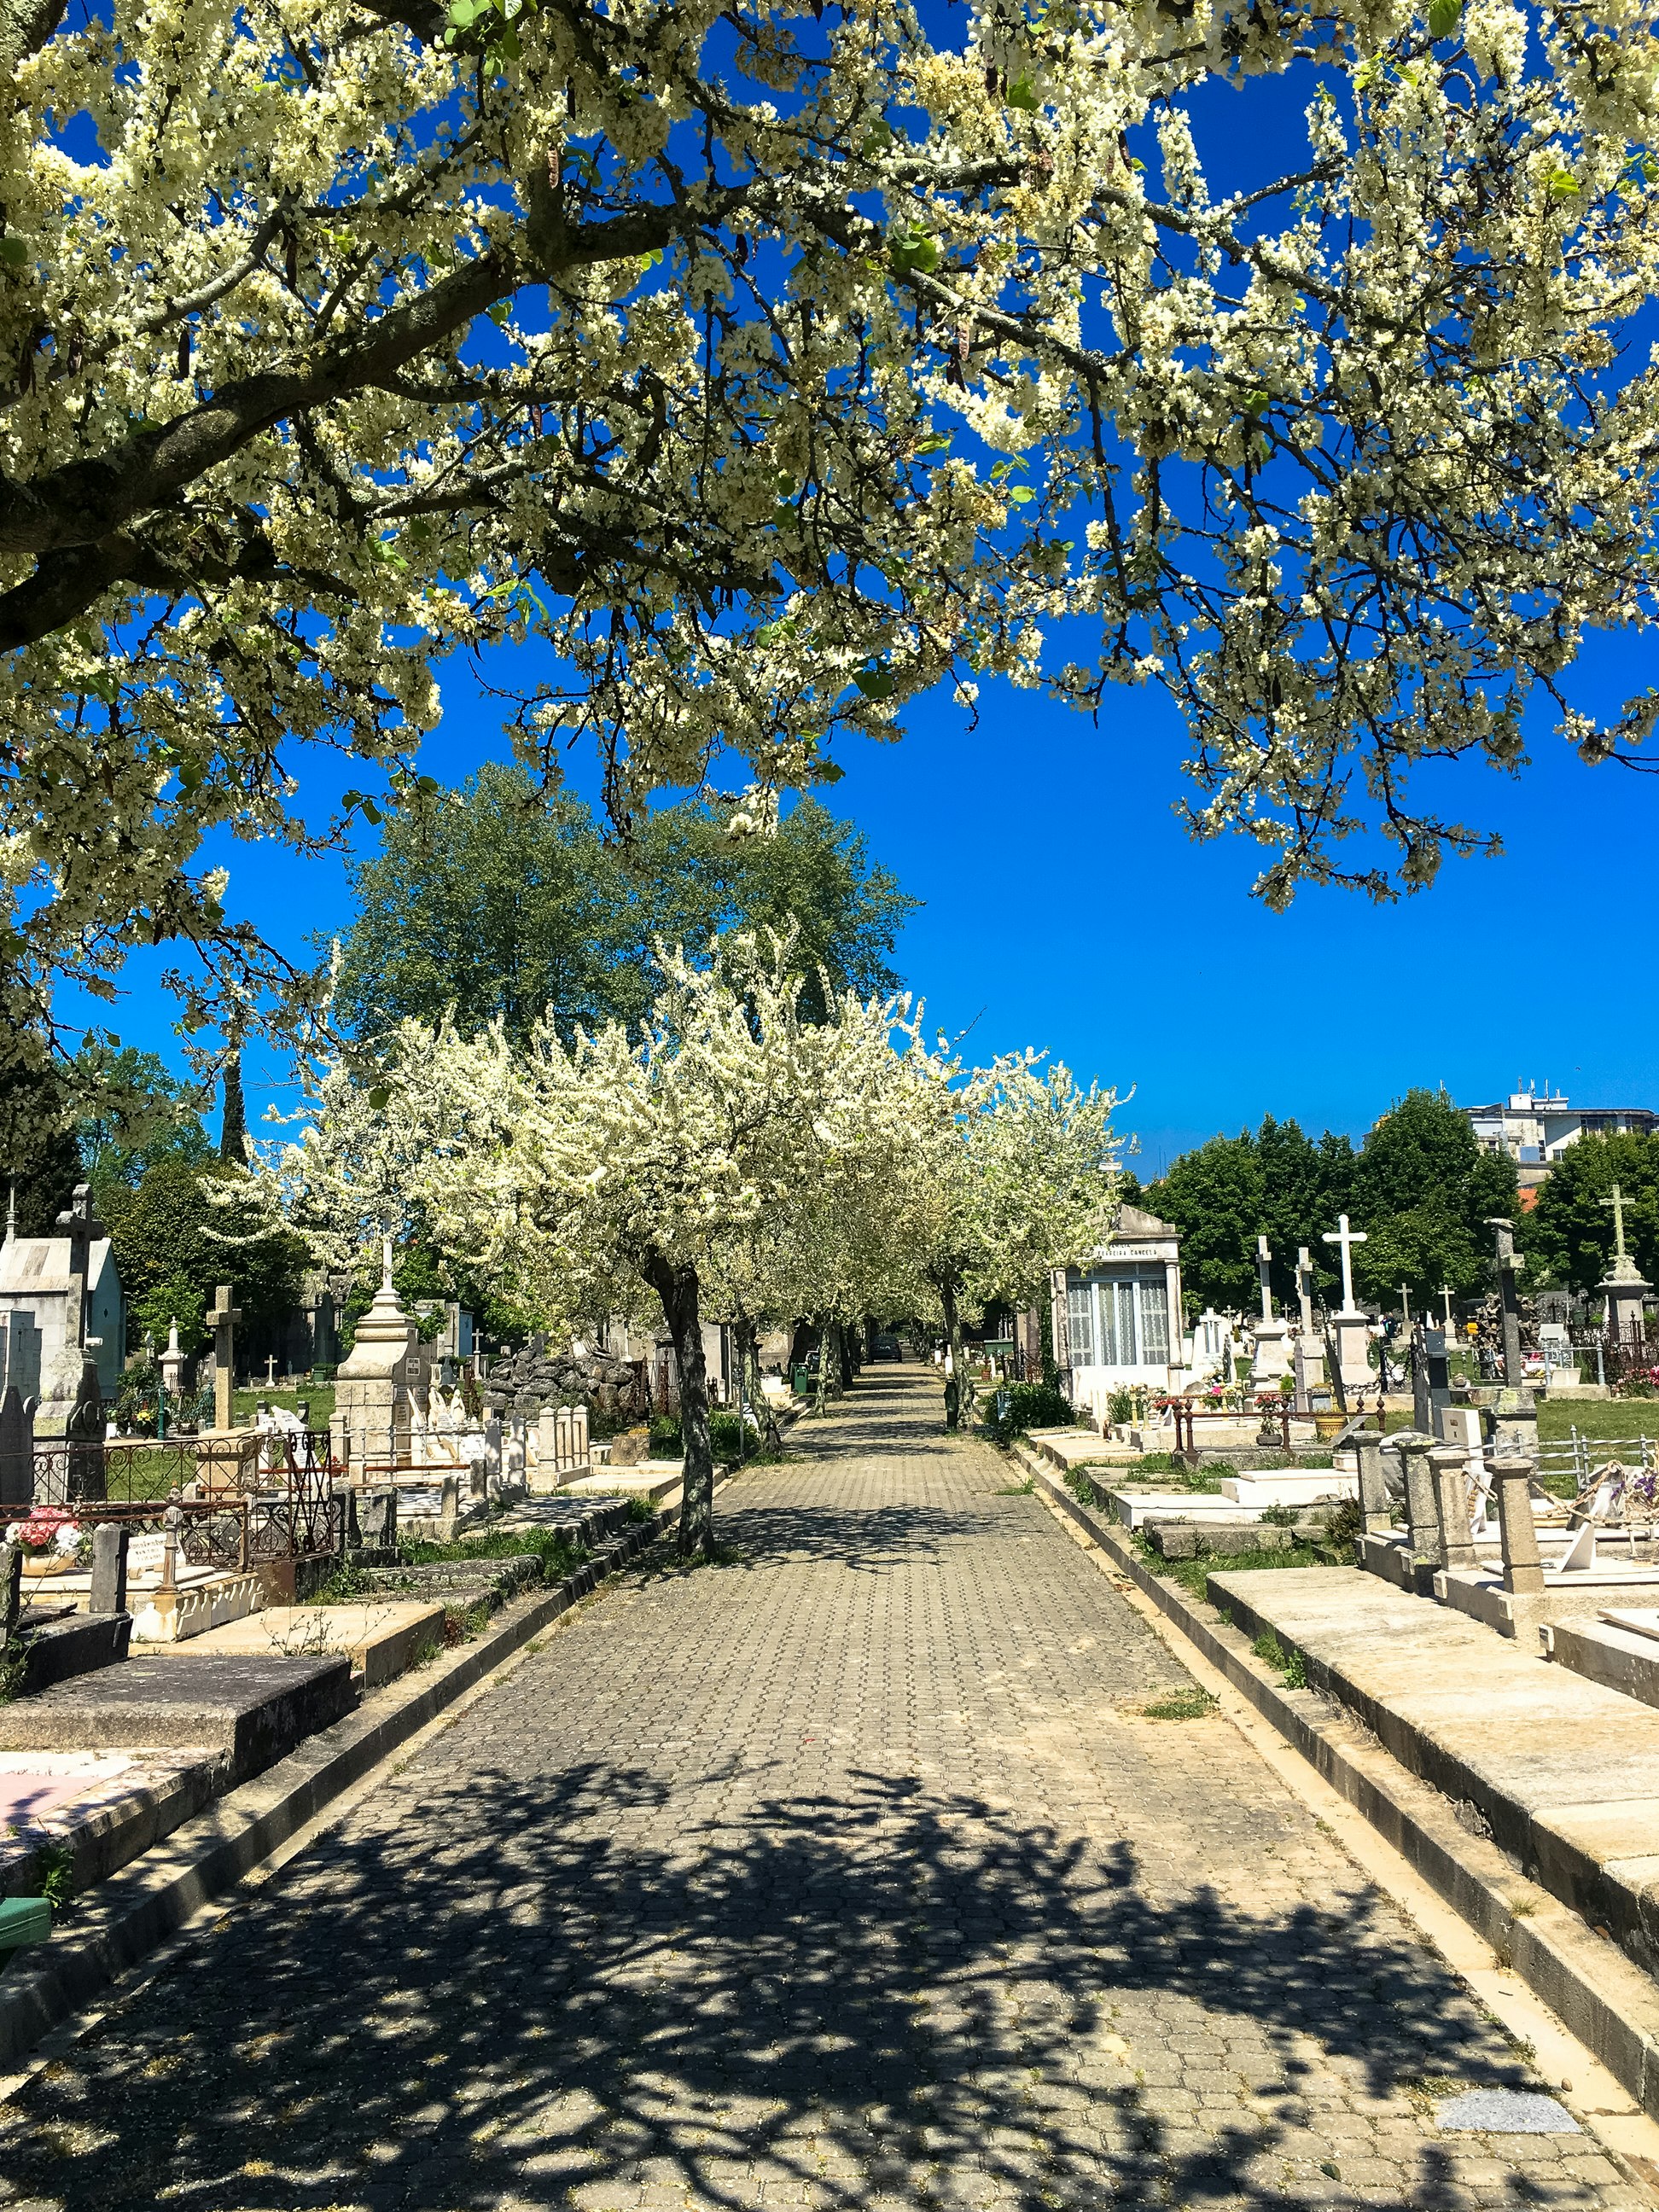 A paved, tree-lined walkway with overhanging blossoms is lined with hundreds of decorative headstones.